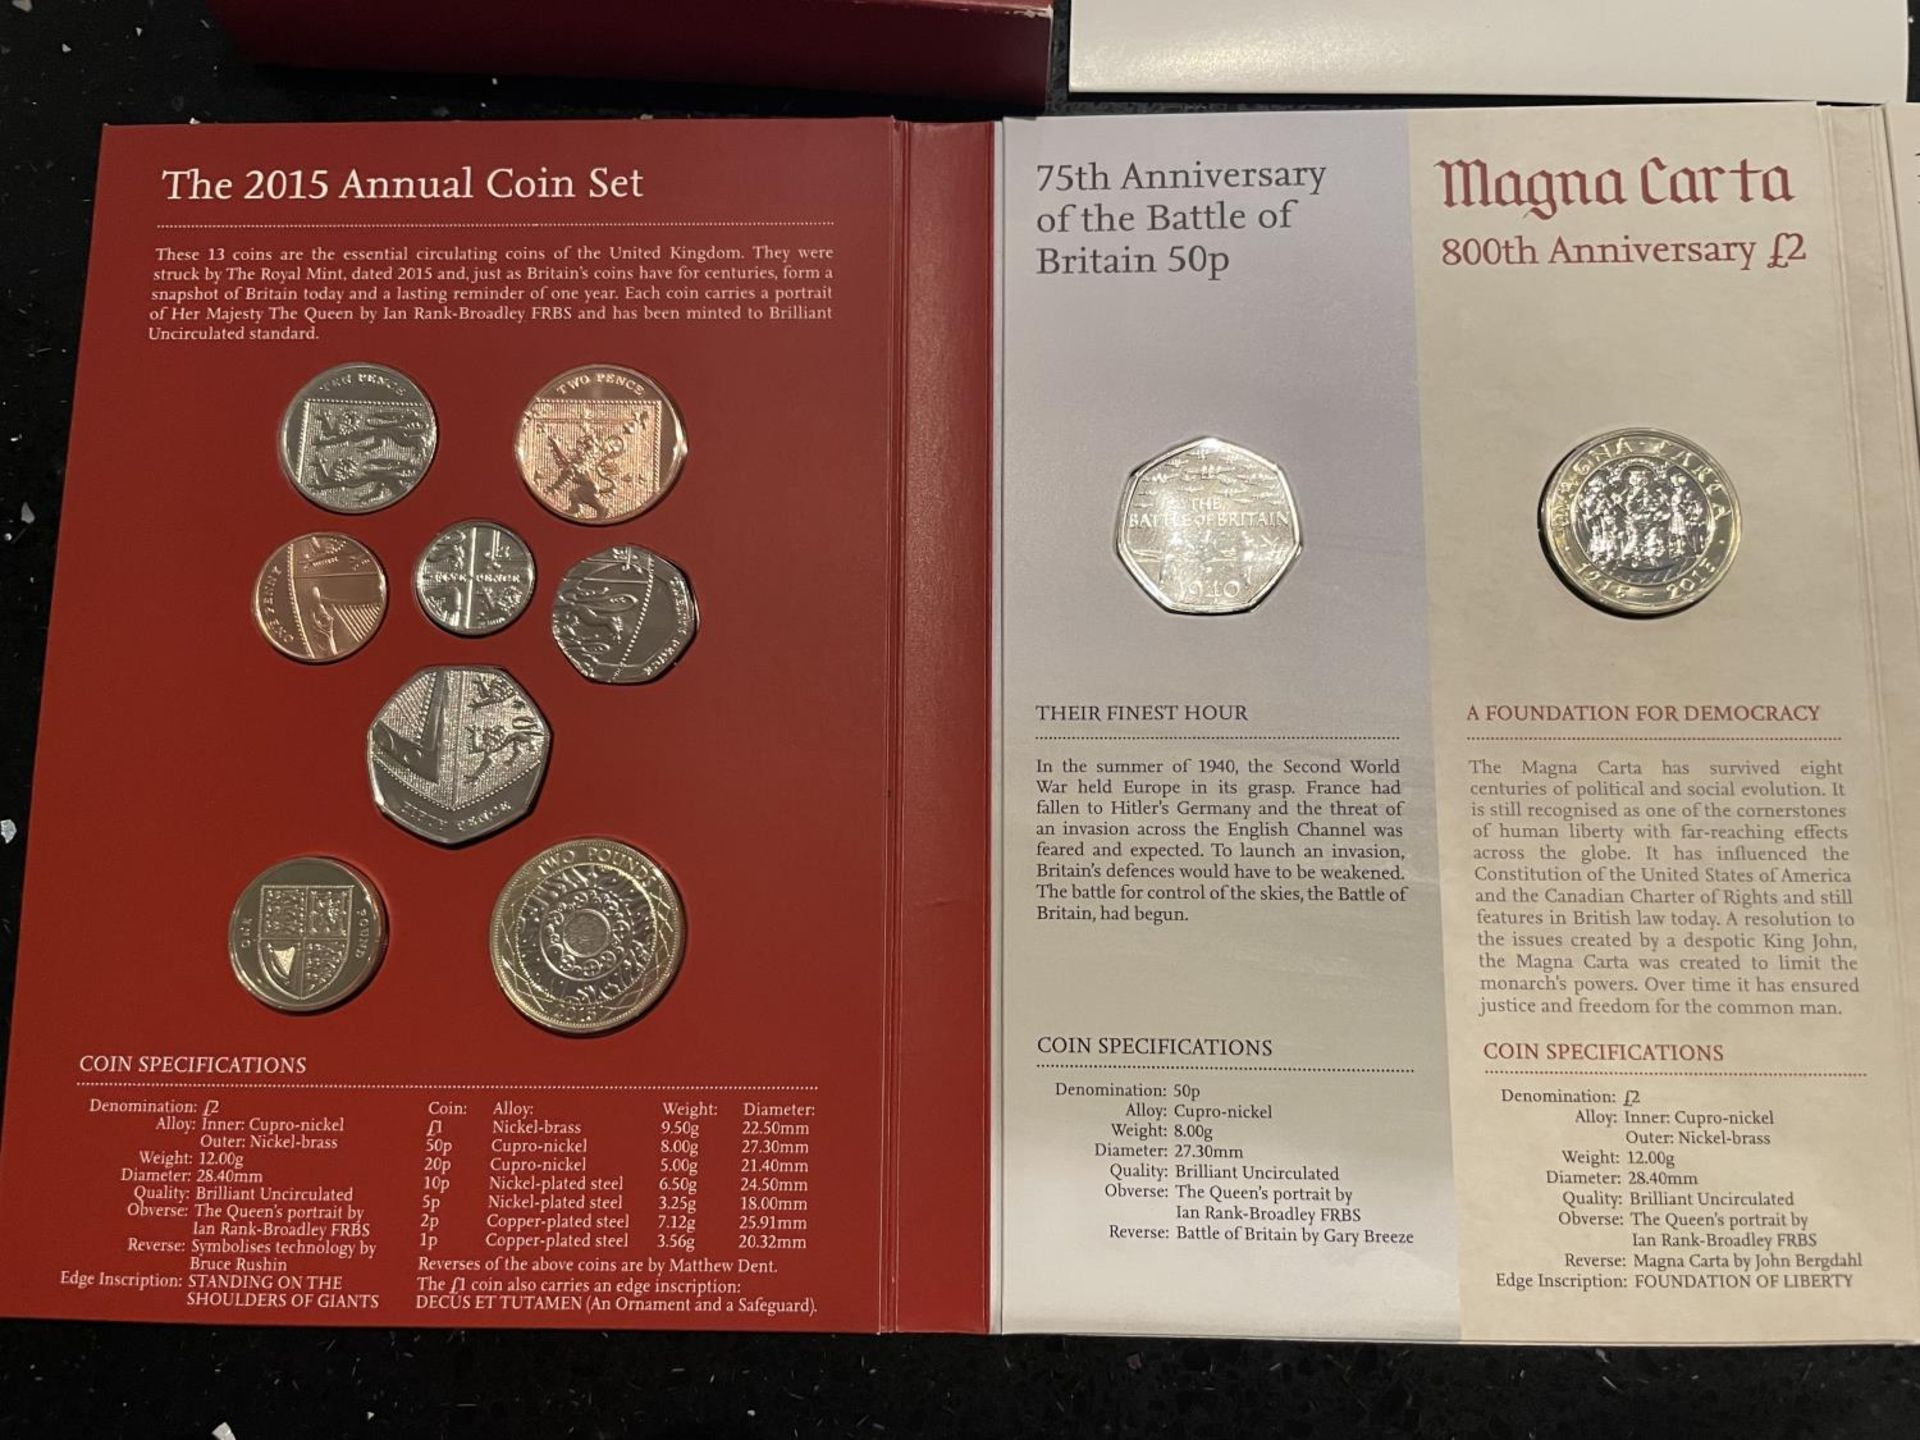 UK , ROYAL MINT , 2015 , ANNUAL COIN SET . PRISTINE CONDITION - Image 3 of 4